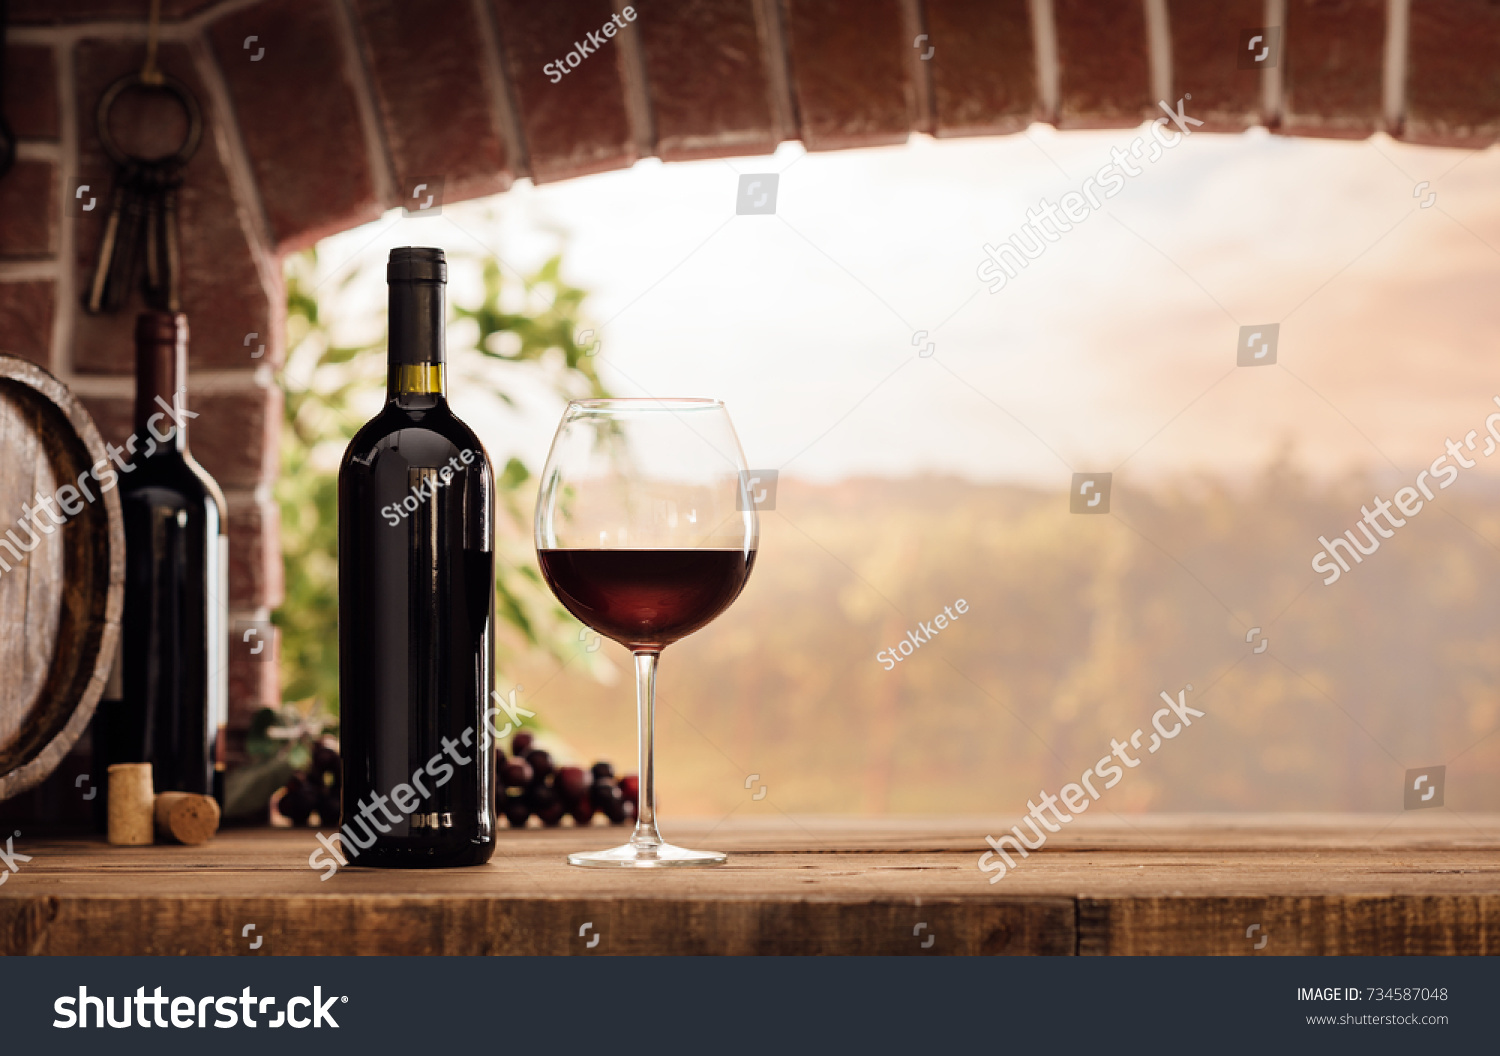 Red wine tasting in the wine cellar: wineglass and bottles next to the window and panoramic view of vineyards at sunset #734587048